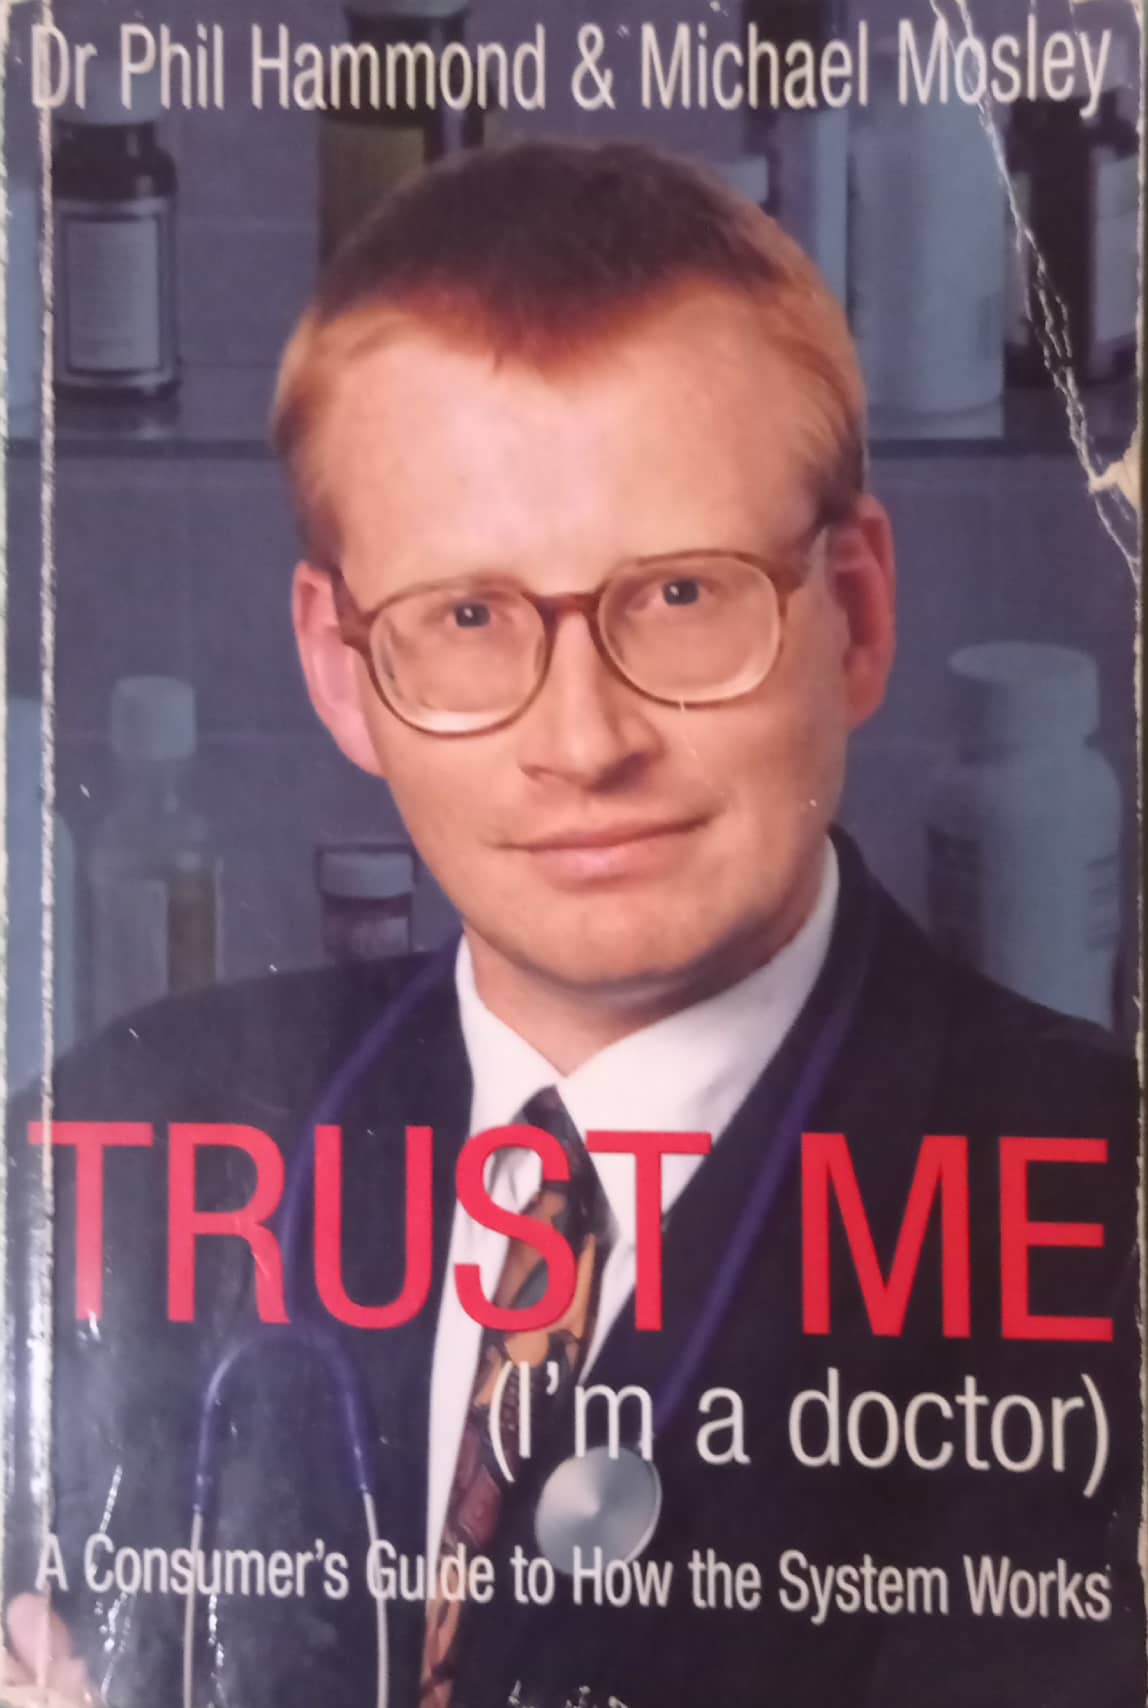 trust me i'm a doctor